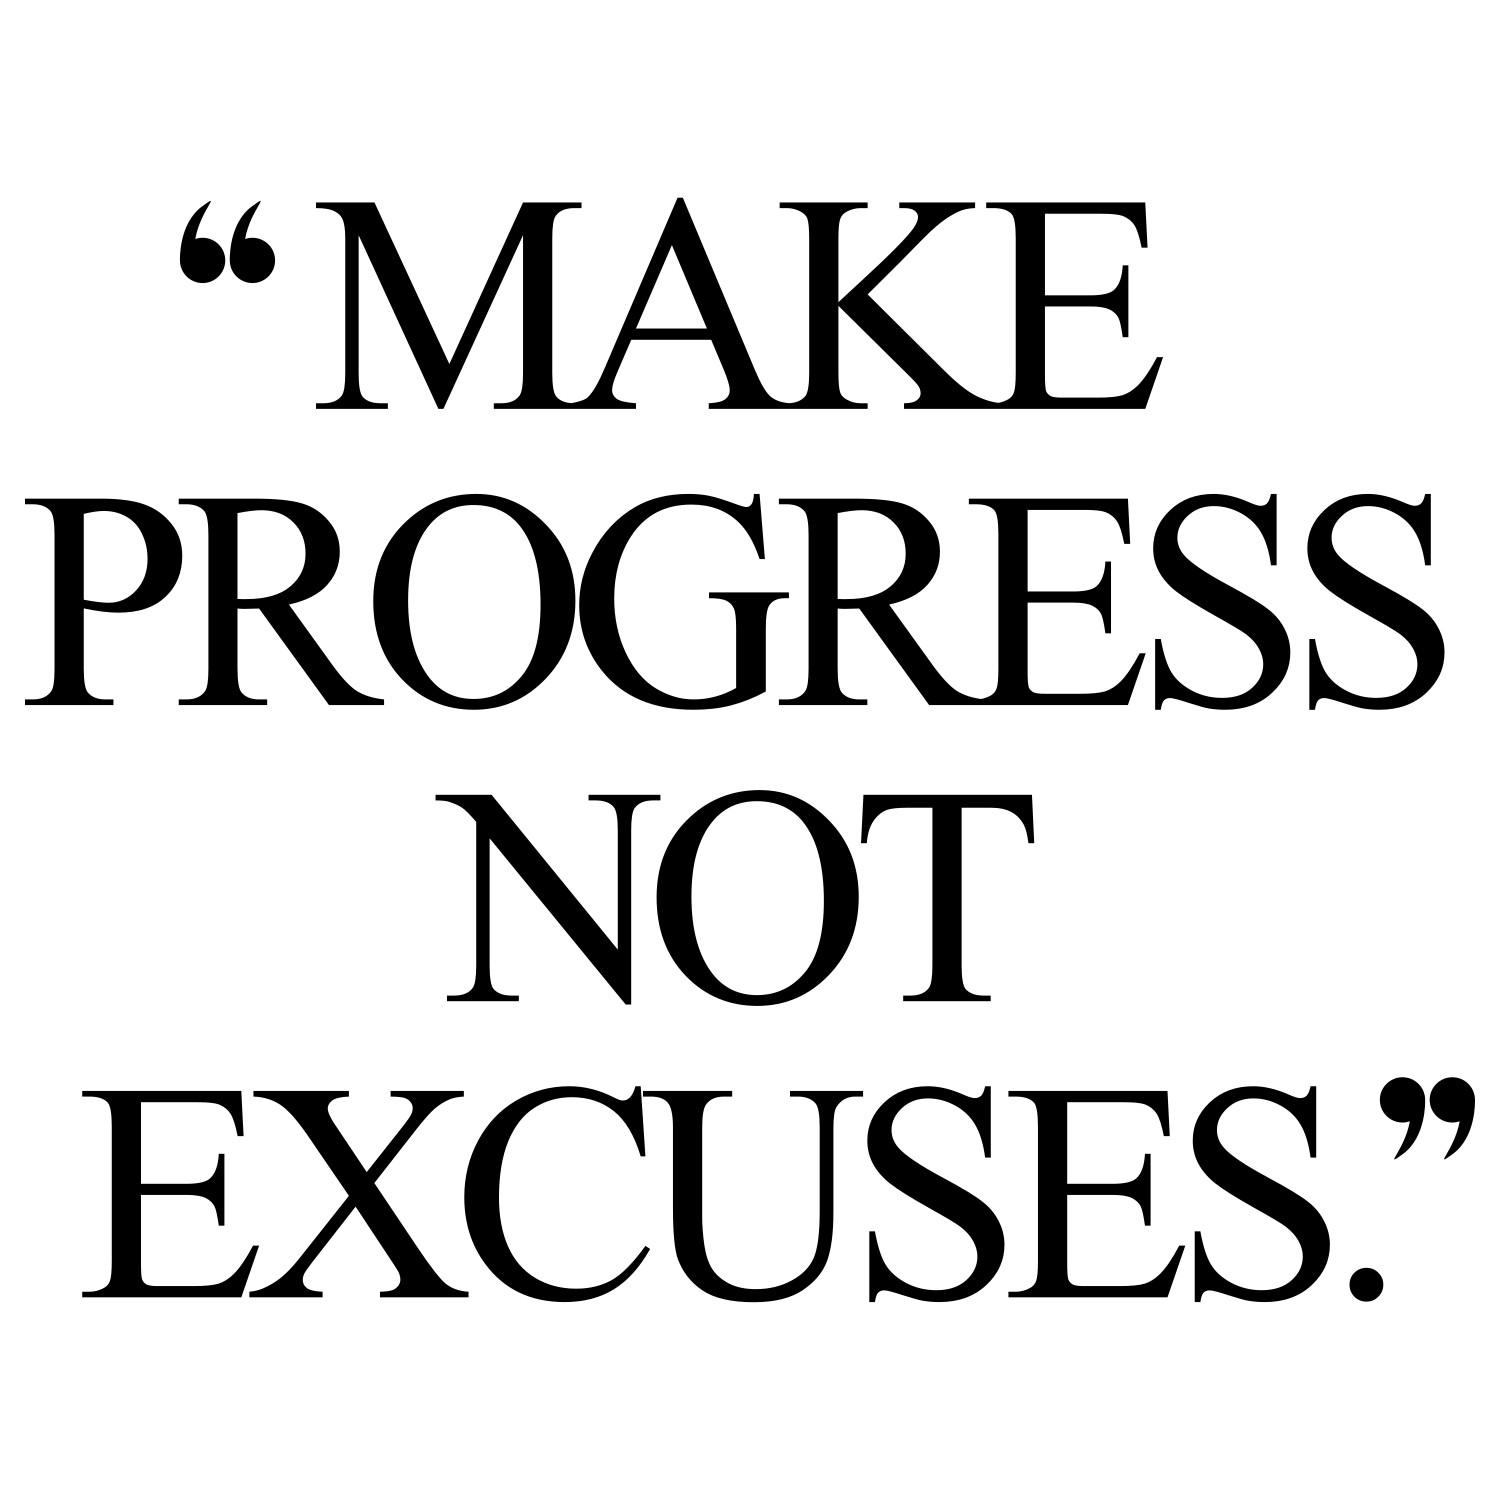 Make progress! Browse our collection of inspirational exercise and healthy eating quotes and get instant weight loss and fitness motivation. Stay focused and get fit, healthy and happy! https://www.spotebi.com/workout-motivation/make-progress/